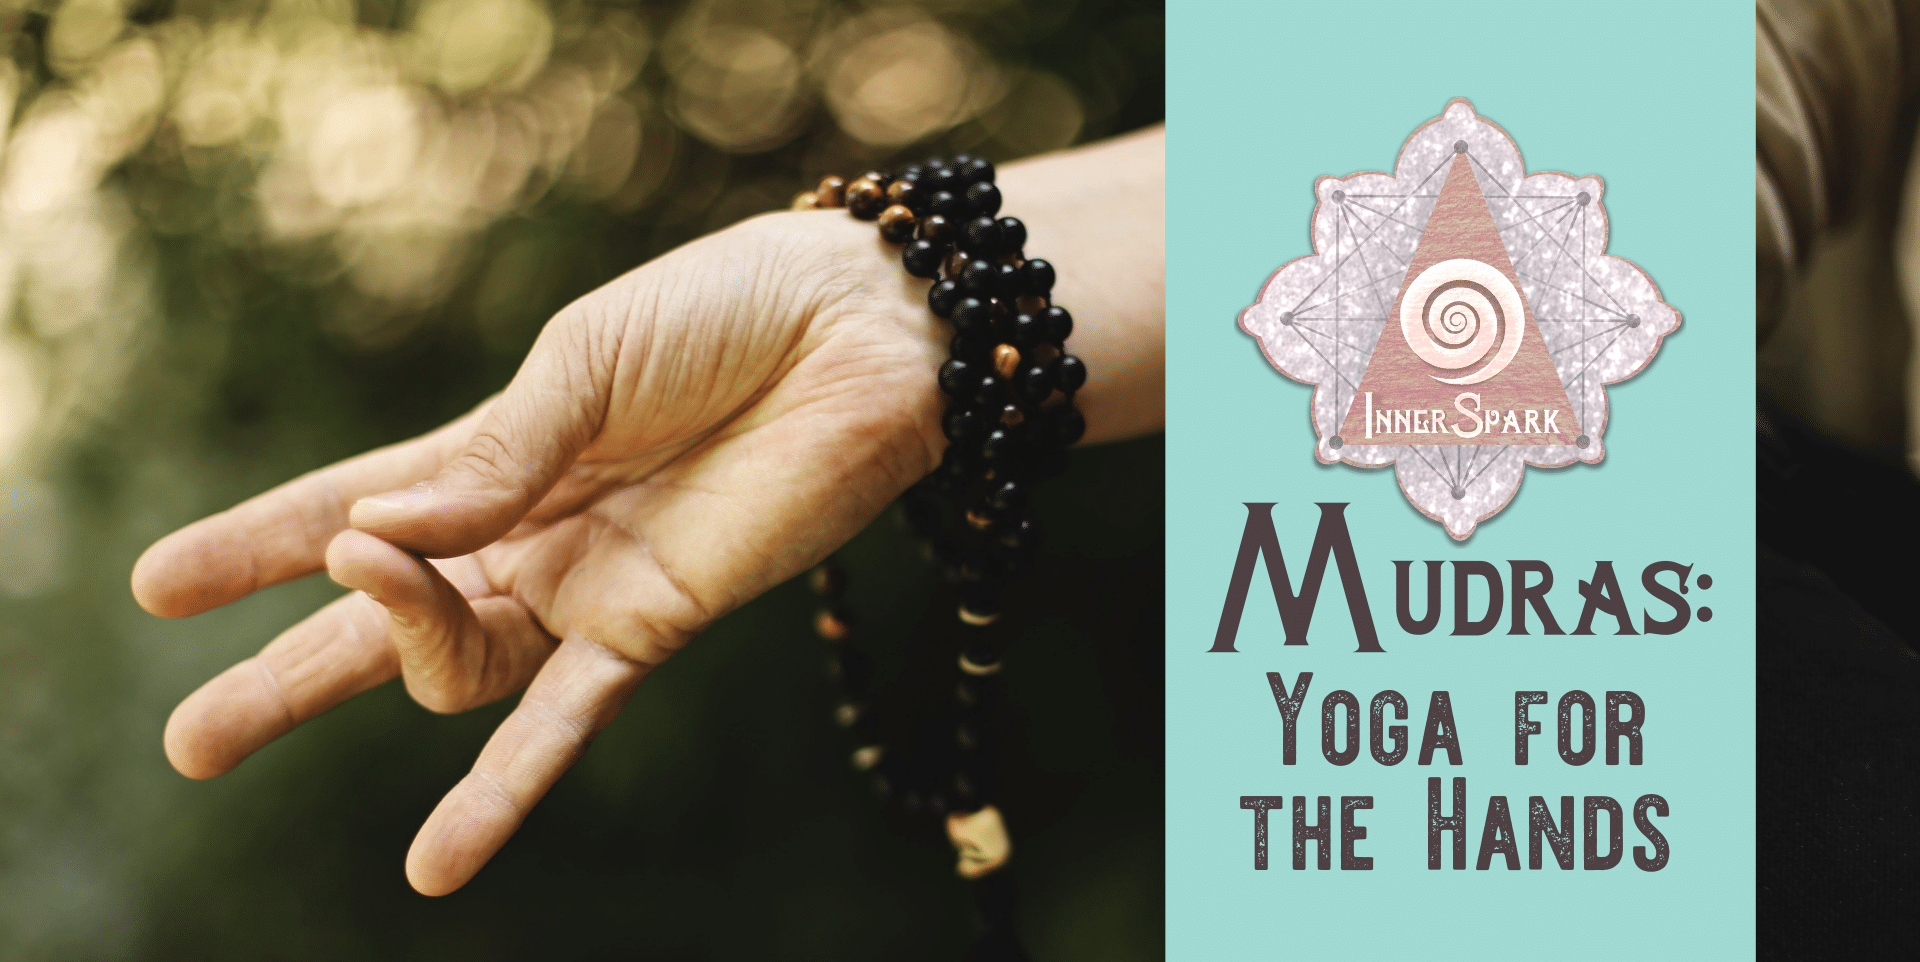 Mudras: Yoga for the hands